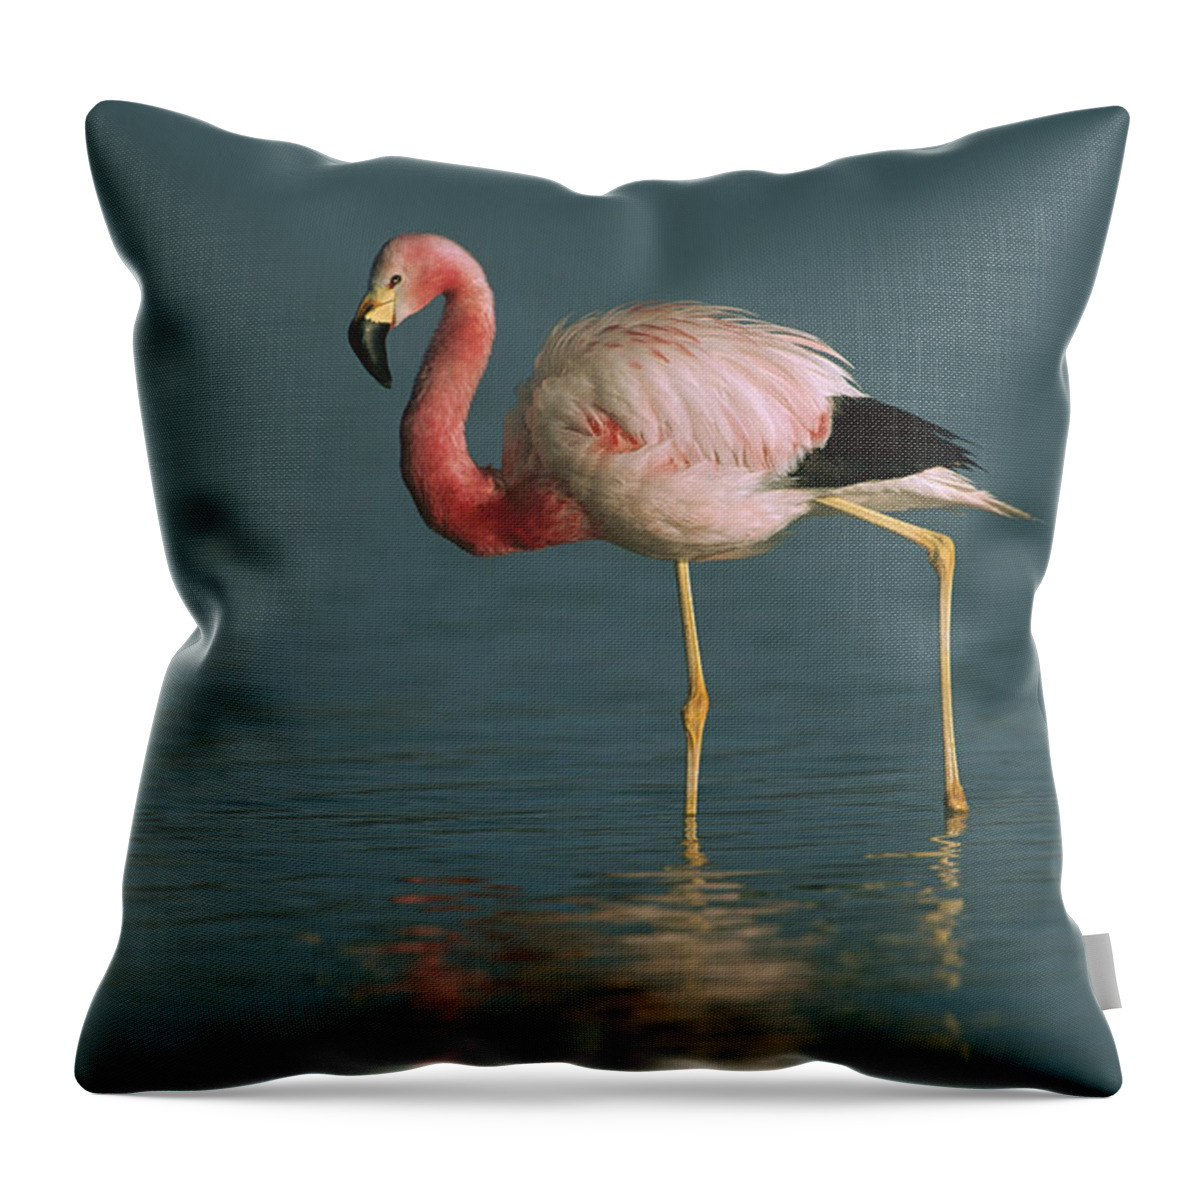 Feb0514 Throw Pillow featuring the photograph Andean Flamingo Wading Laguna Blanca by Pete Oxford